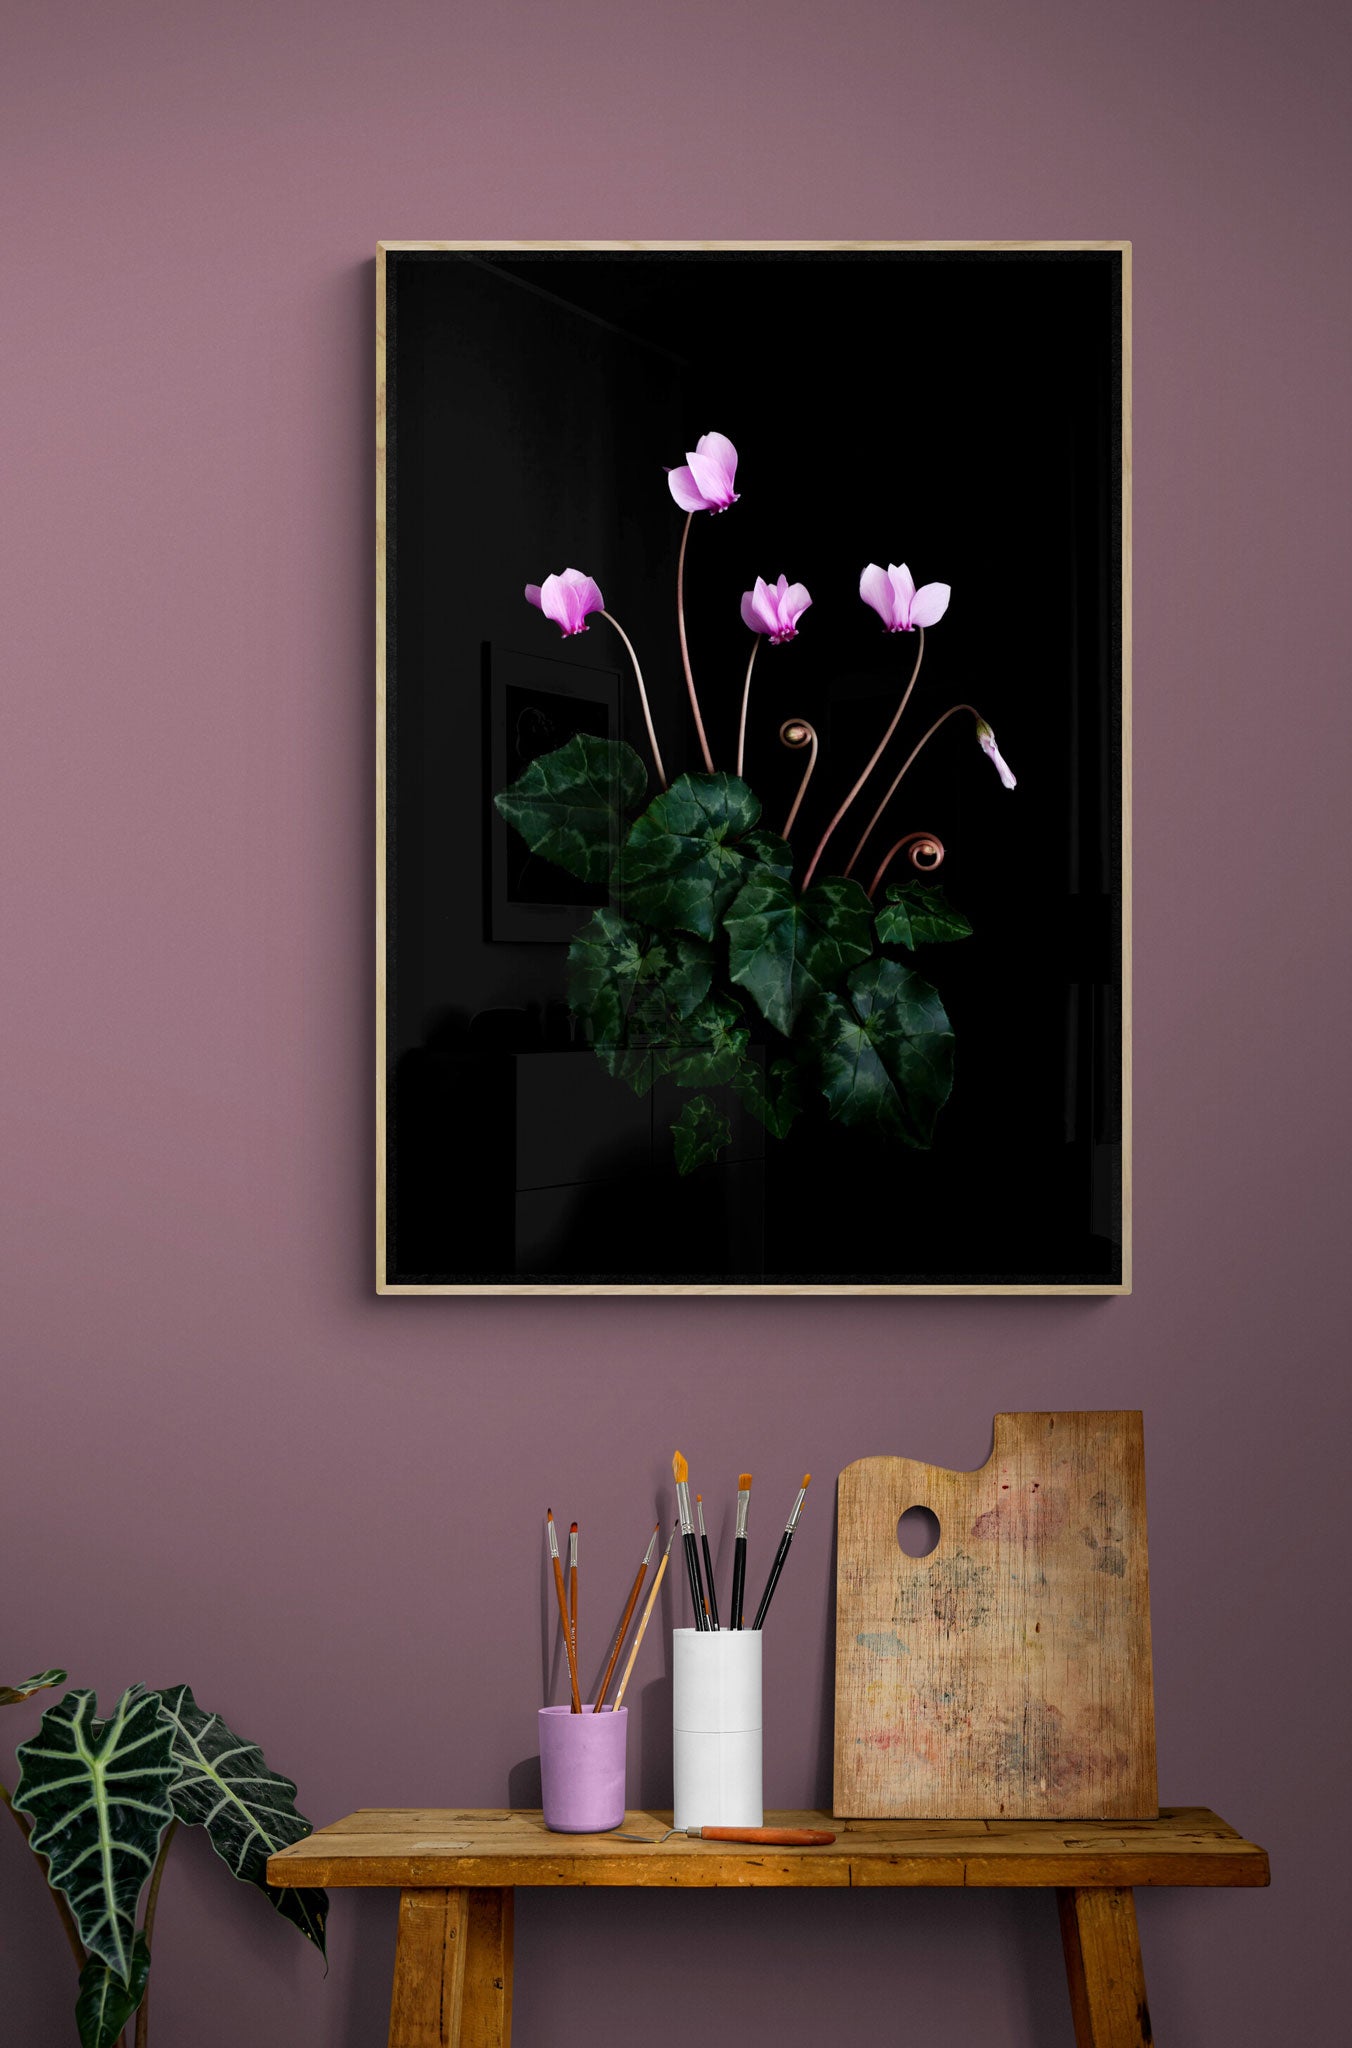 A botanical prrint of an intimate study of the autumn flowering Cyclamen hederifolium, featuring it's dainty pink flowers and marbled foliage, photographed on a black background on a dark dusky pink wall.